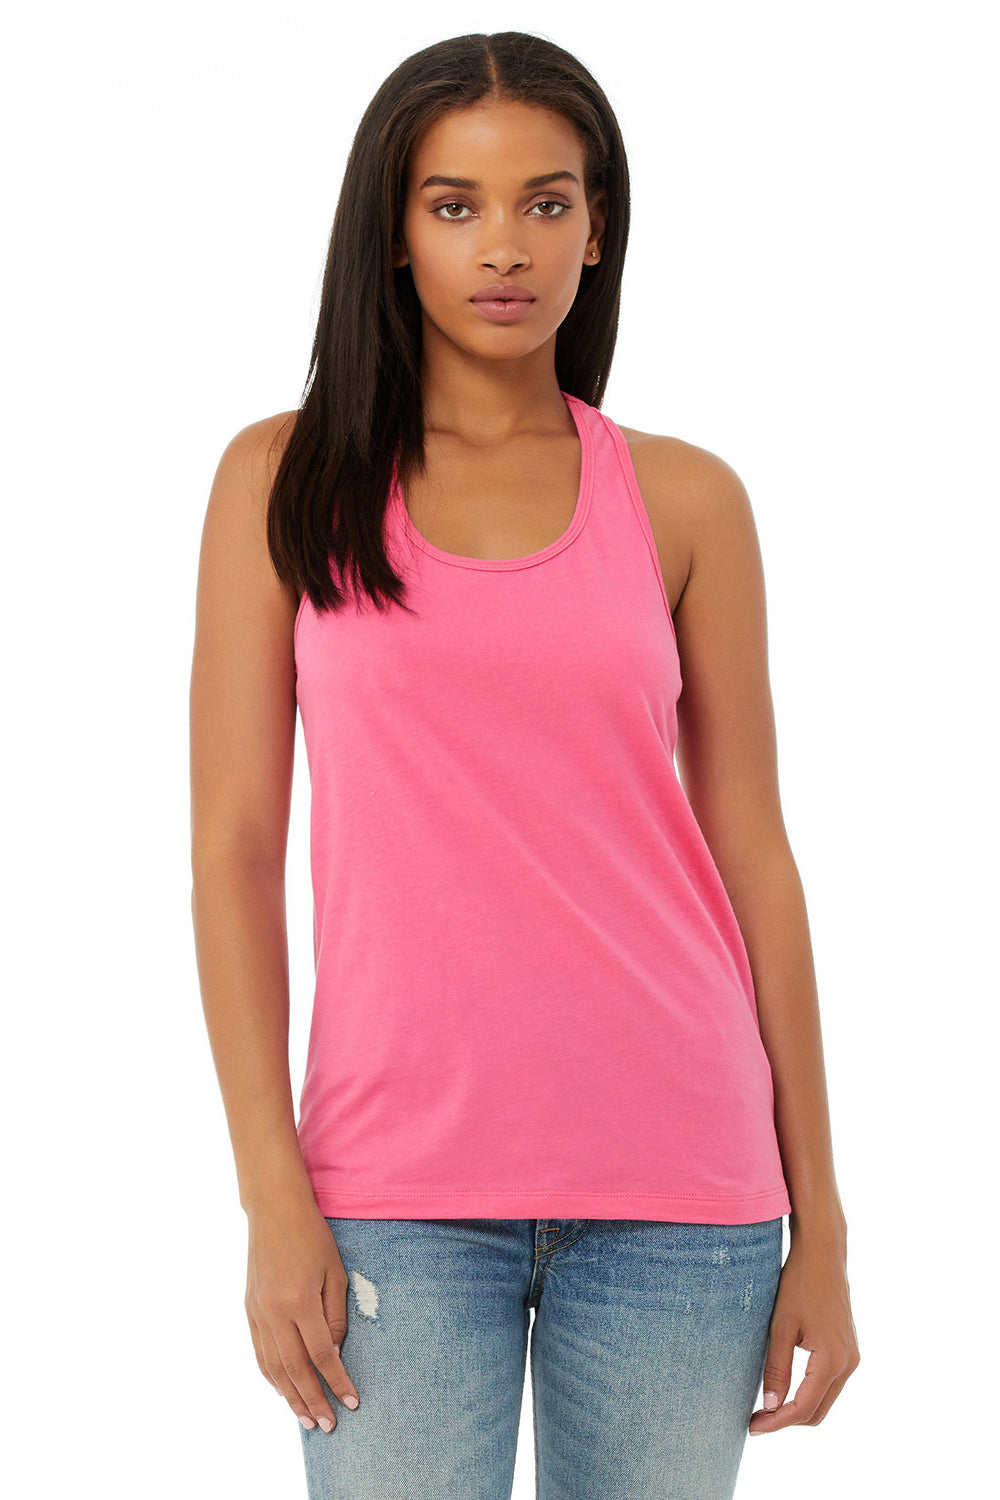 Bella + Canvas BC6008/B6008/6008 Womens Jersey Tank Top Charity Pink Model Front